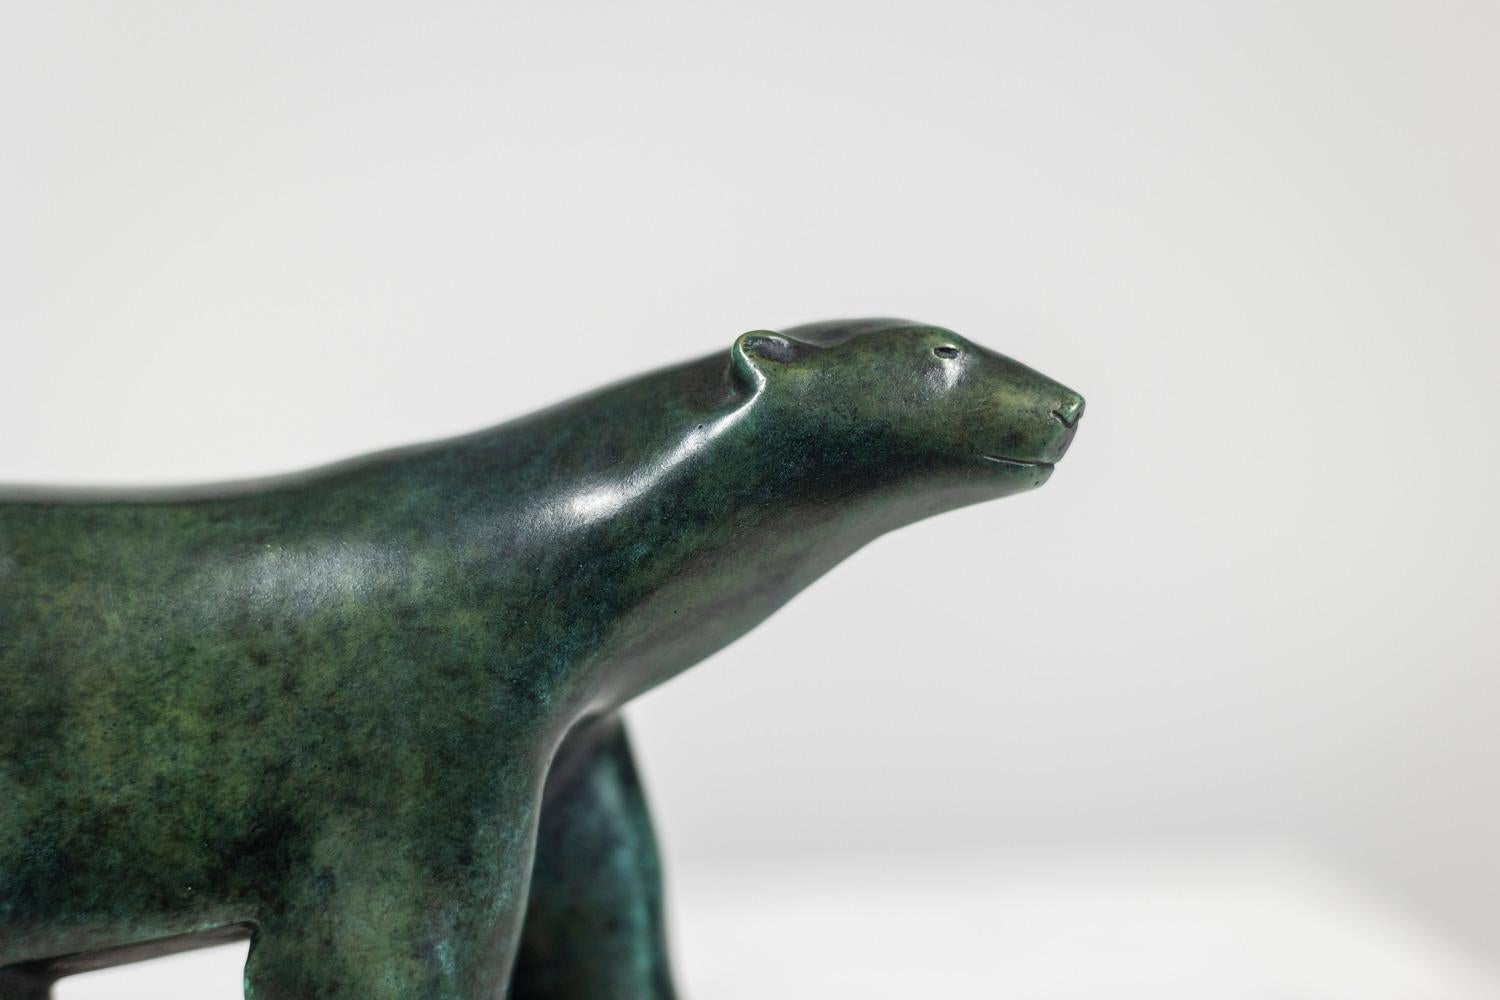 vFrançois Pompon.
Atelier Valsuani, edited by.

Sculpture entitled “Ours blanc”. Bronze with green patina, lost wax casting.

Stamp of the Foundry “lost wax C. Valsuani”. Reproduction dated 2006. Numbered 9/25.

Reference: LS59872161A